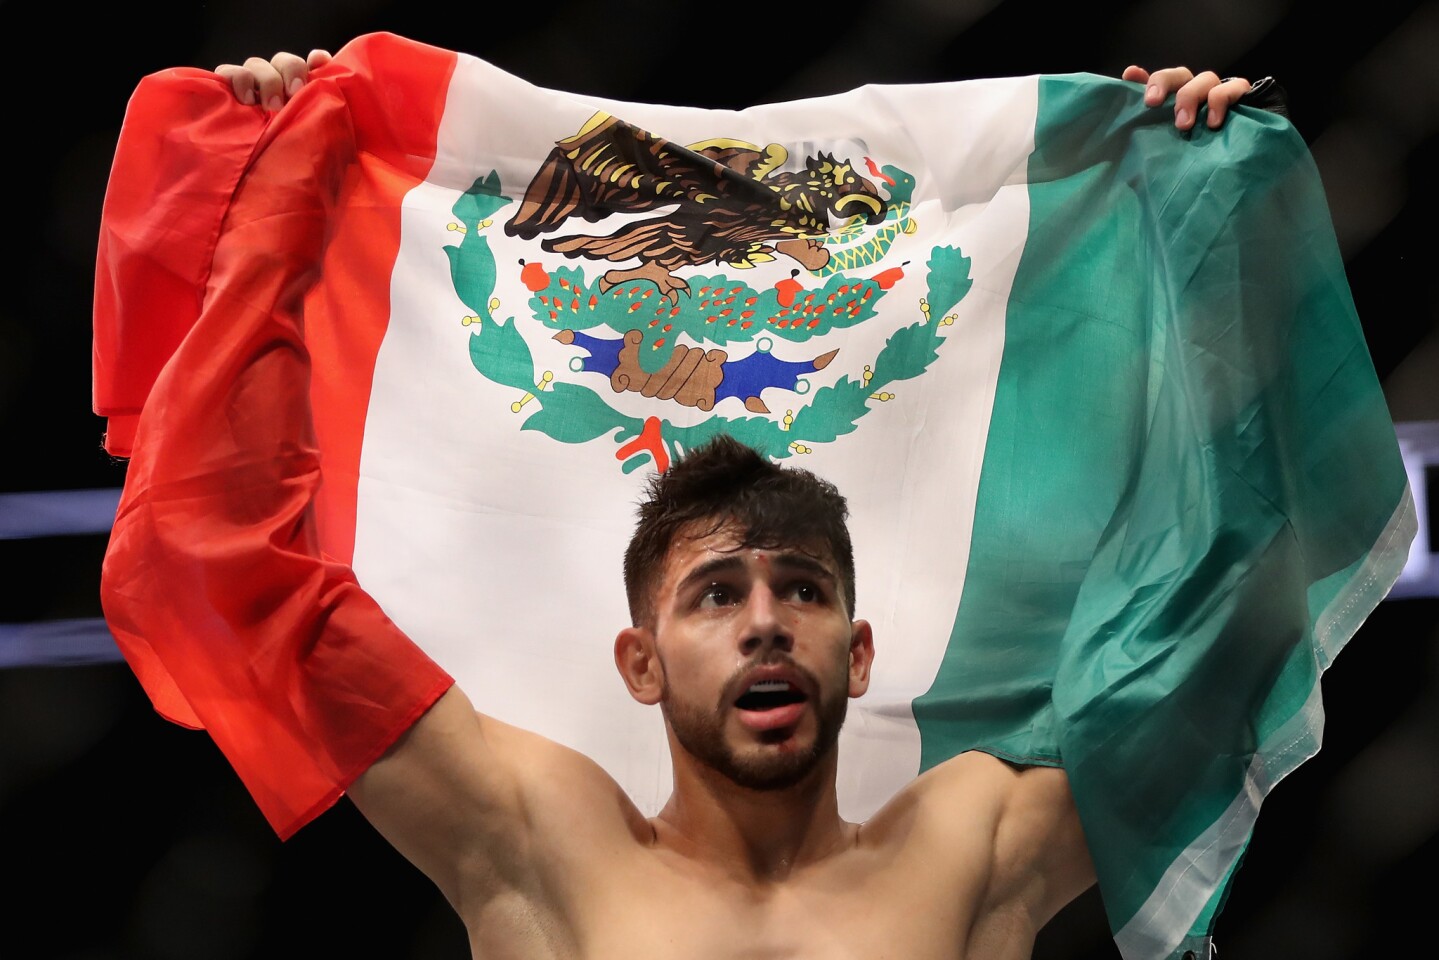 PHOENIX, AZ - JANUARY 15: Yair Rodriguez celebrates his victory over BJ Penn (not pictured) during the UFC Fight Night event at the at Talking Stick Resort Arena on January 15, 2017 in Phoenix, Arizona. (Photo by Christian Petersen/Getty Images) ** OUTS - ELSENT, FPG, CM - OUTS * NM, PH, VA if sourced by CT, LA or MoD **